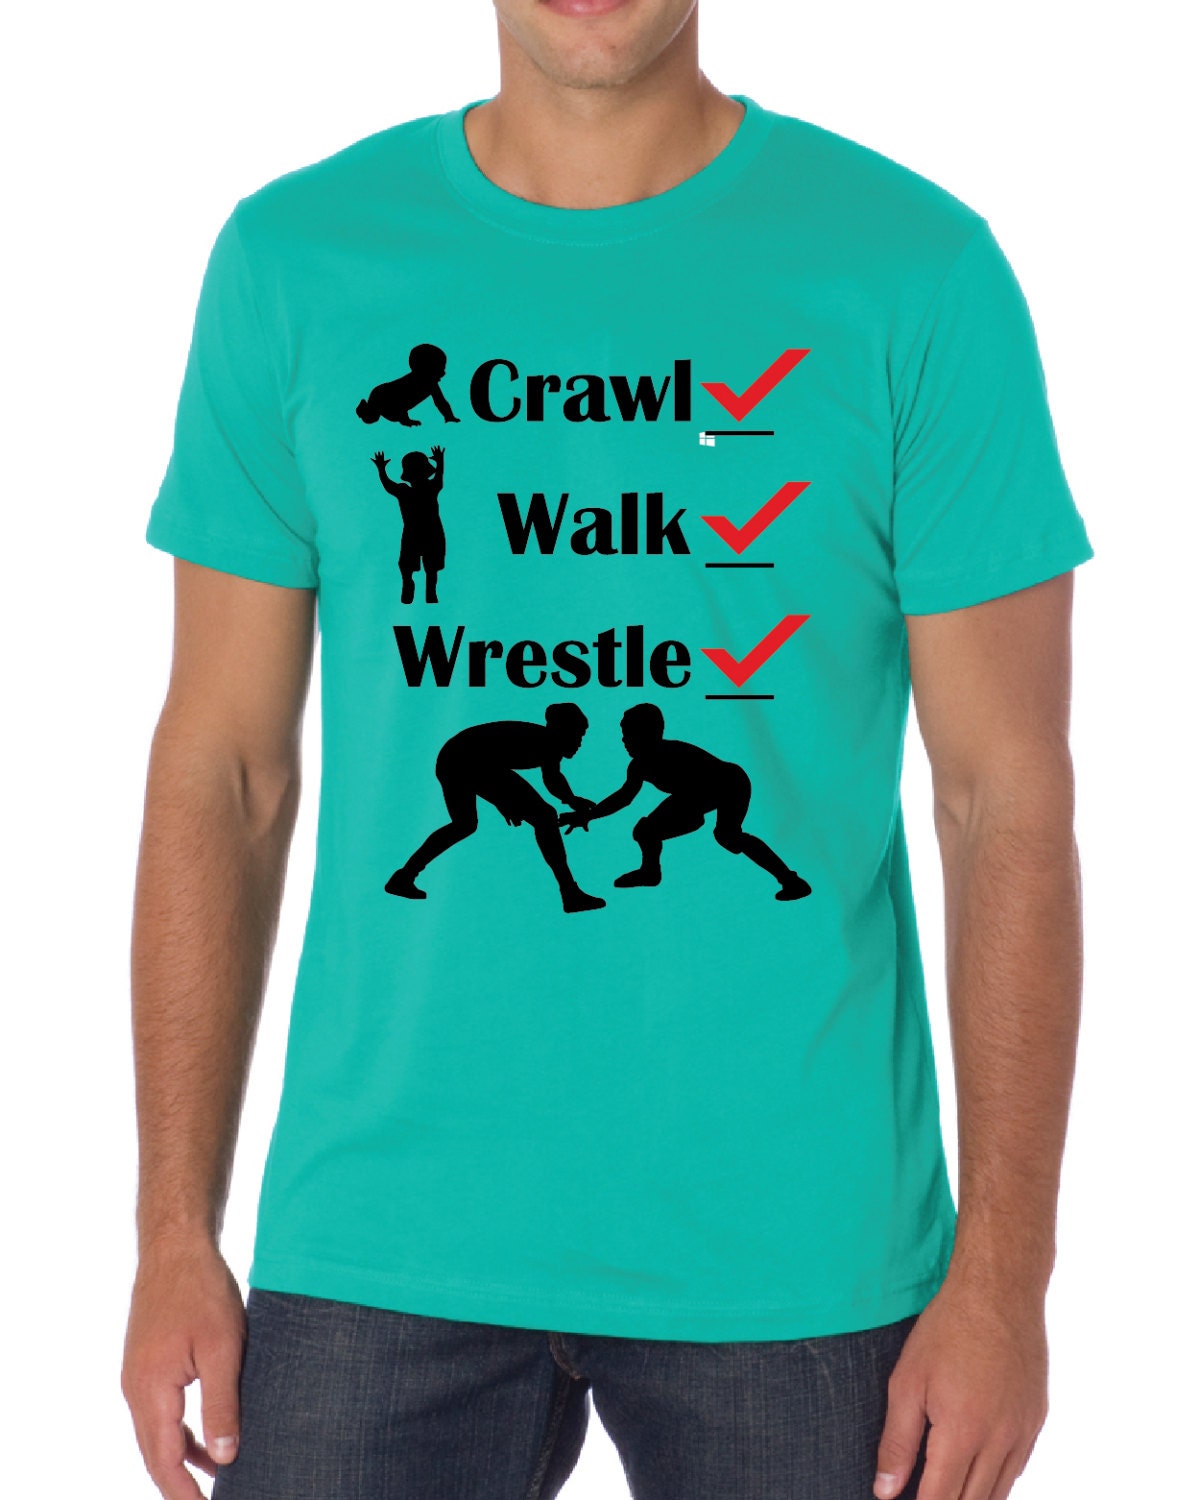 Download Wrestling Tee Shirt Design SVG DXF vector files for use with